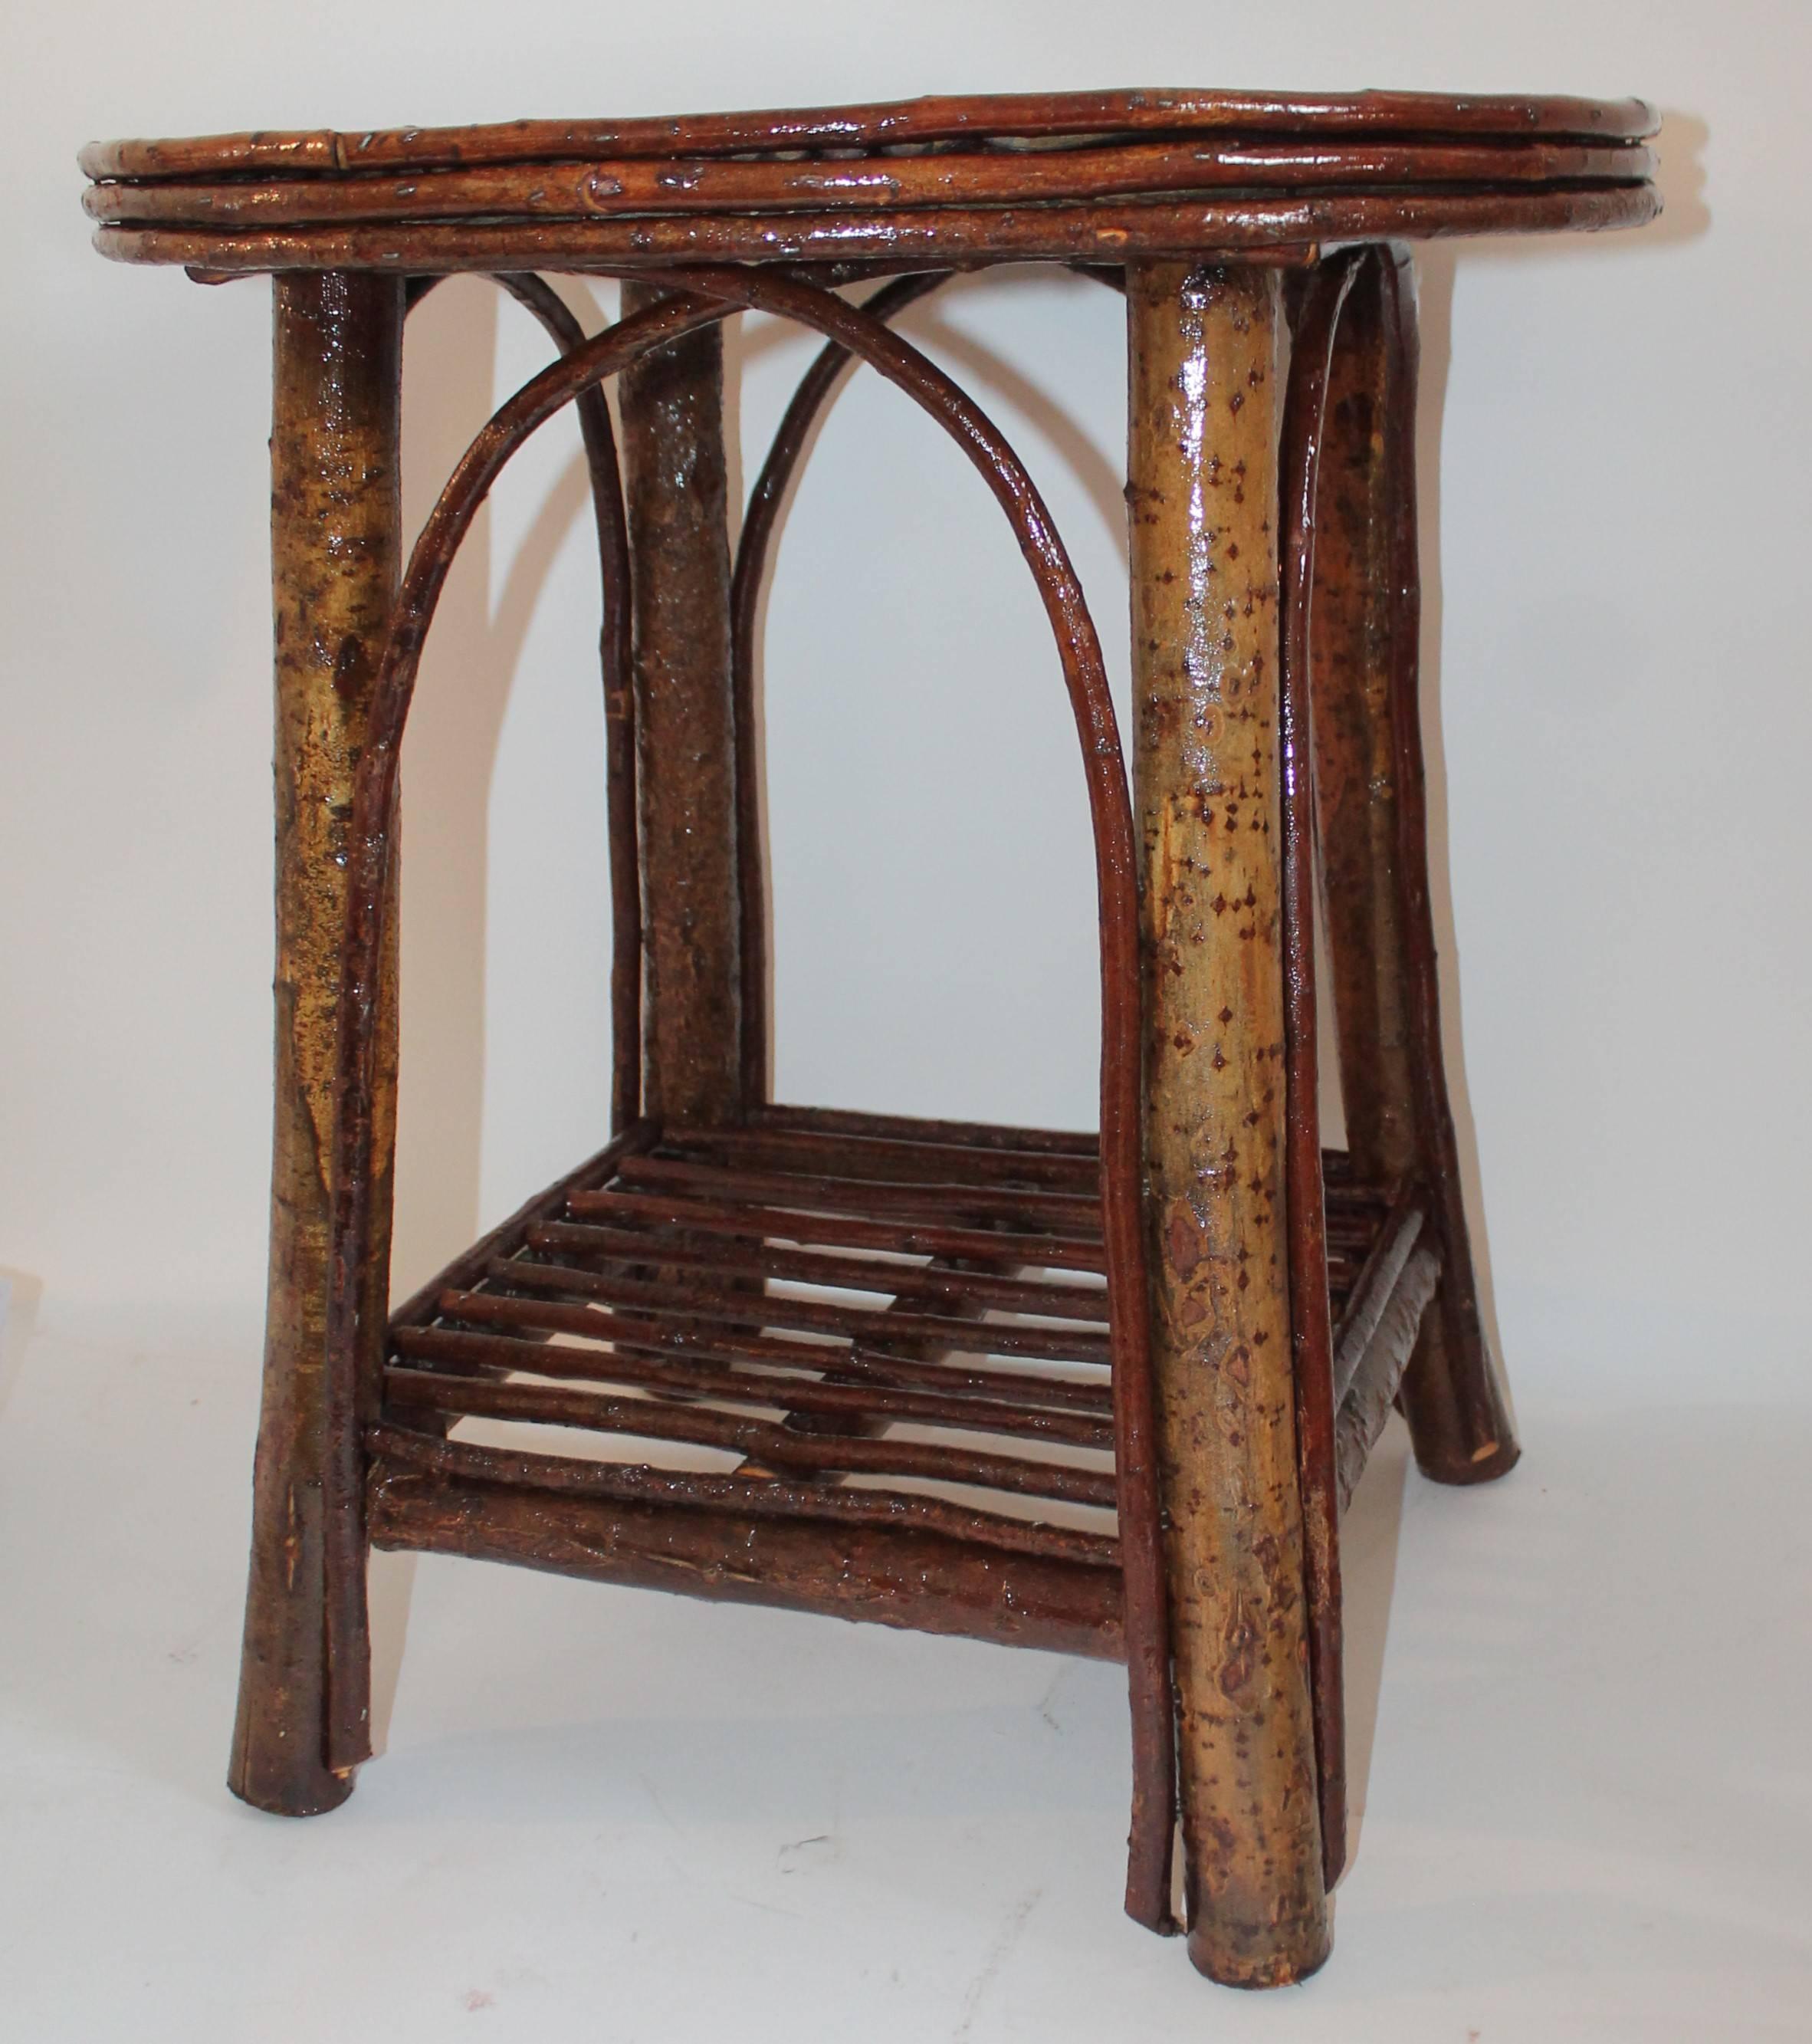 Adirondack hickory rustic twig side table. This cool little birch bark covered twig table is in good sturdy condition.